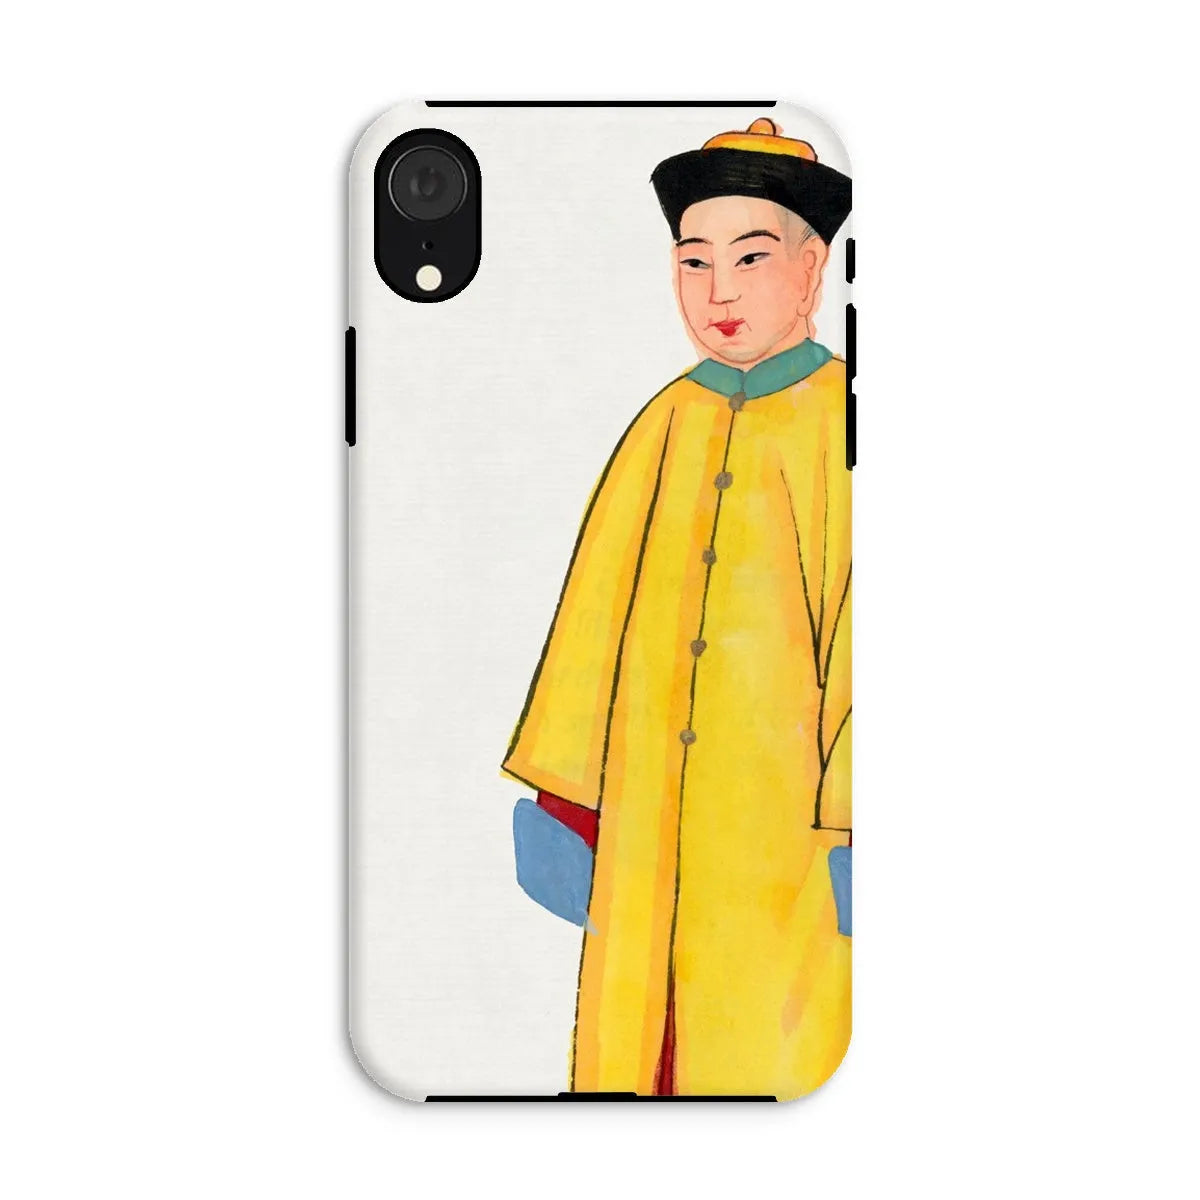 Priest In Yellow Robes - Chinese Aesthetic Art Phone Case - Iphone Xr / Matte - Mobile Phone Cases - Aesthetic Art